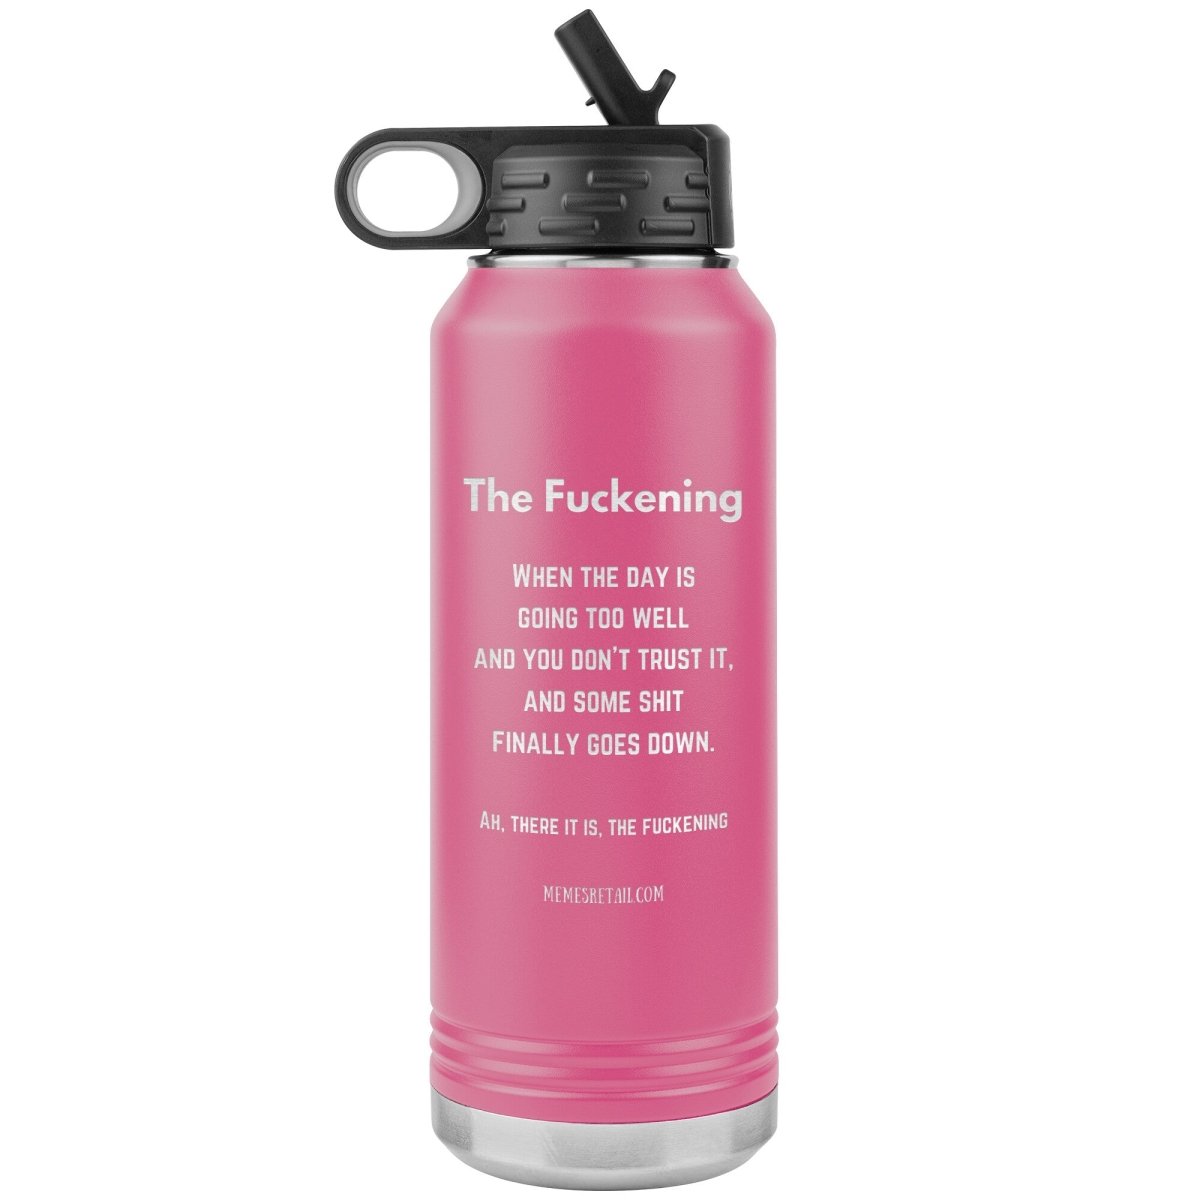 The Fuckening, When you don't trust the day. 32 oz Water Bottle, Pink - MemesRetail.com